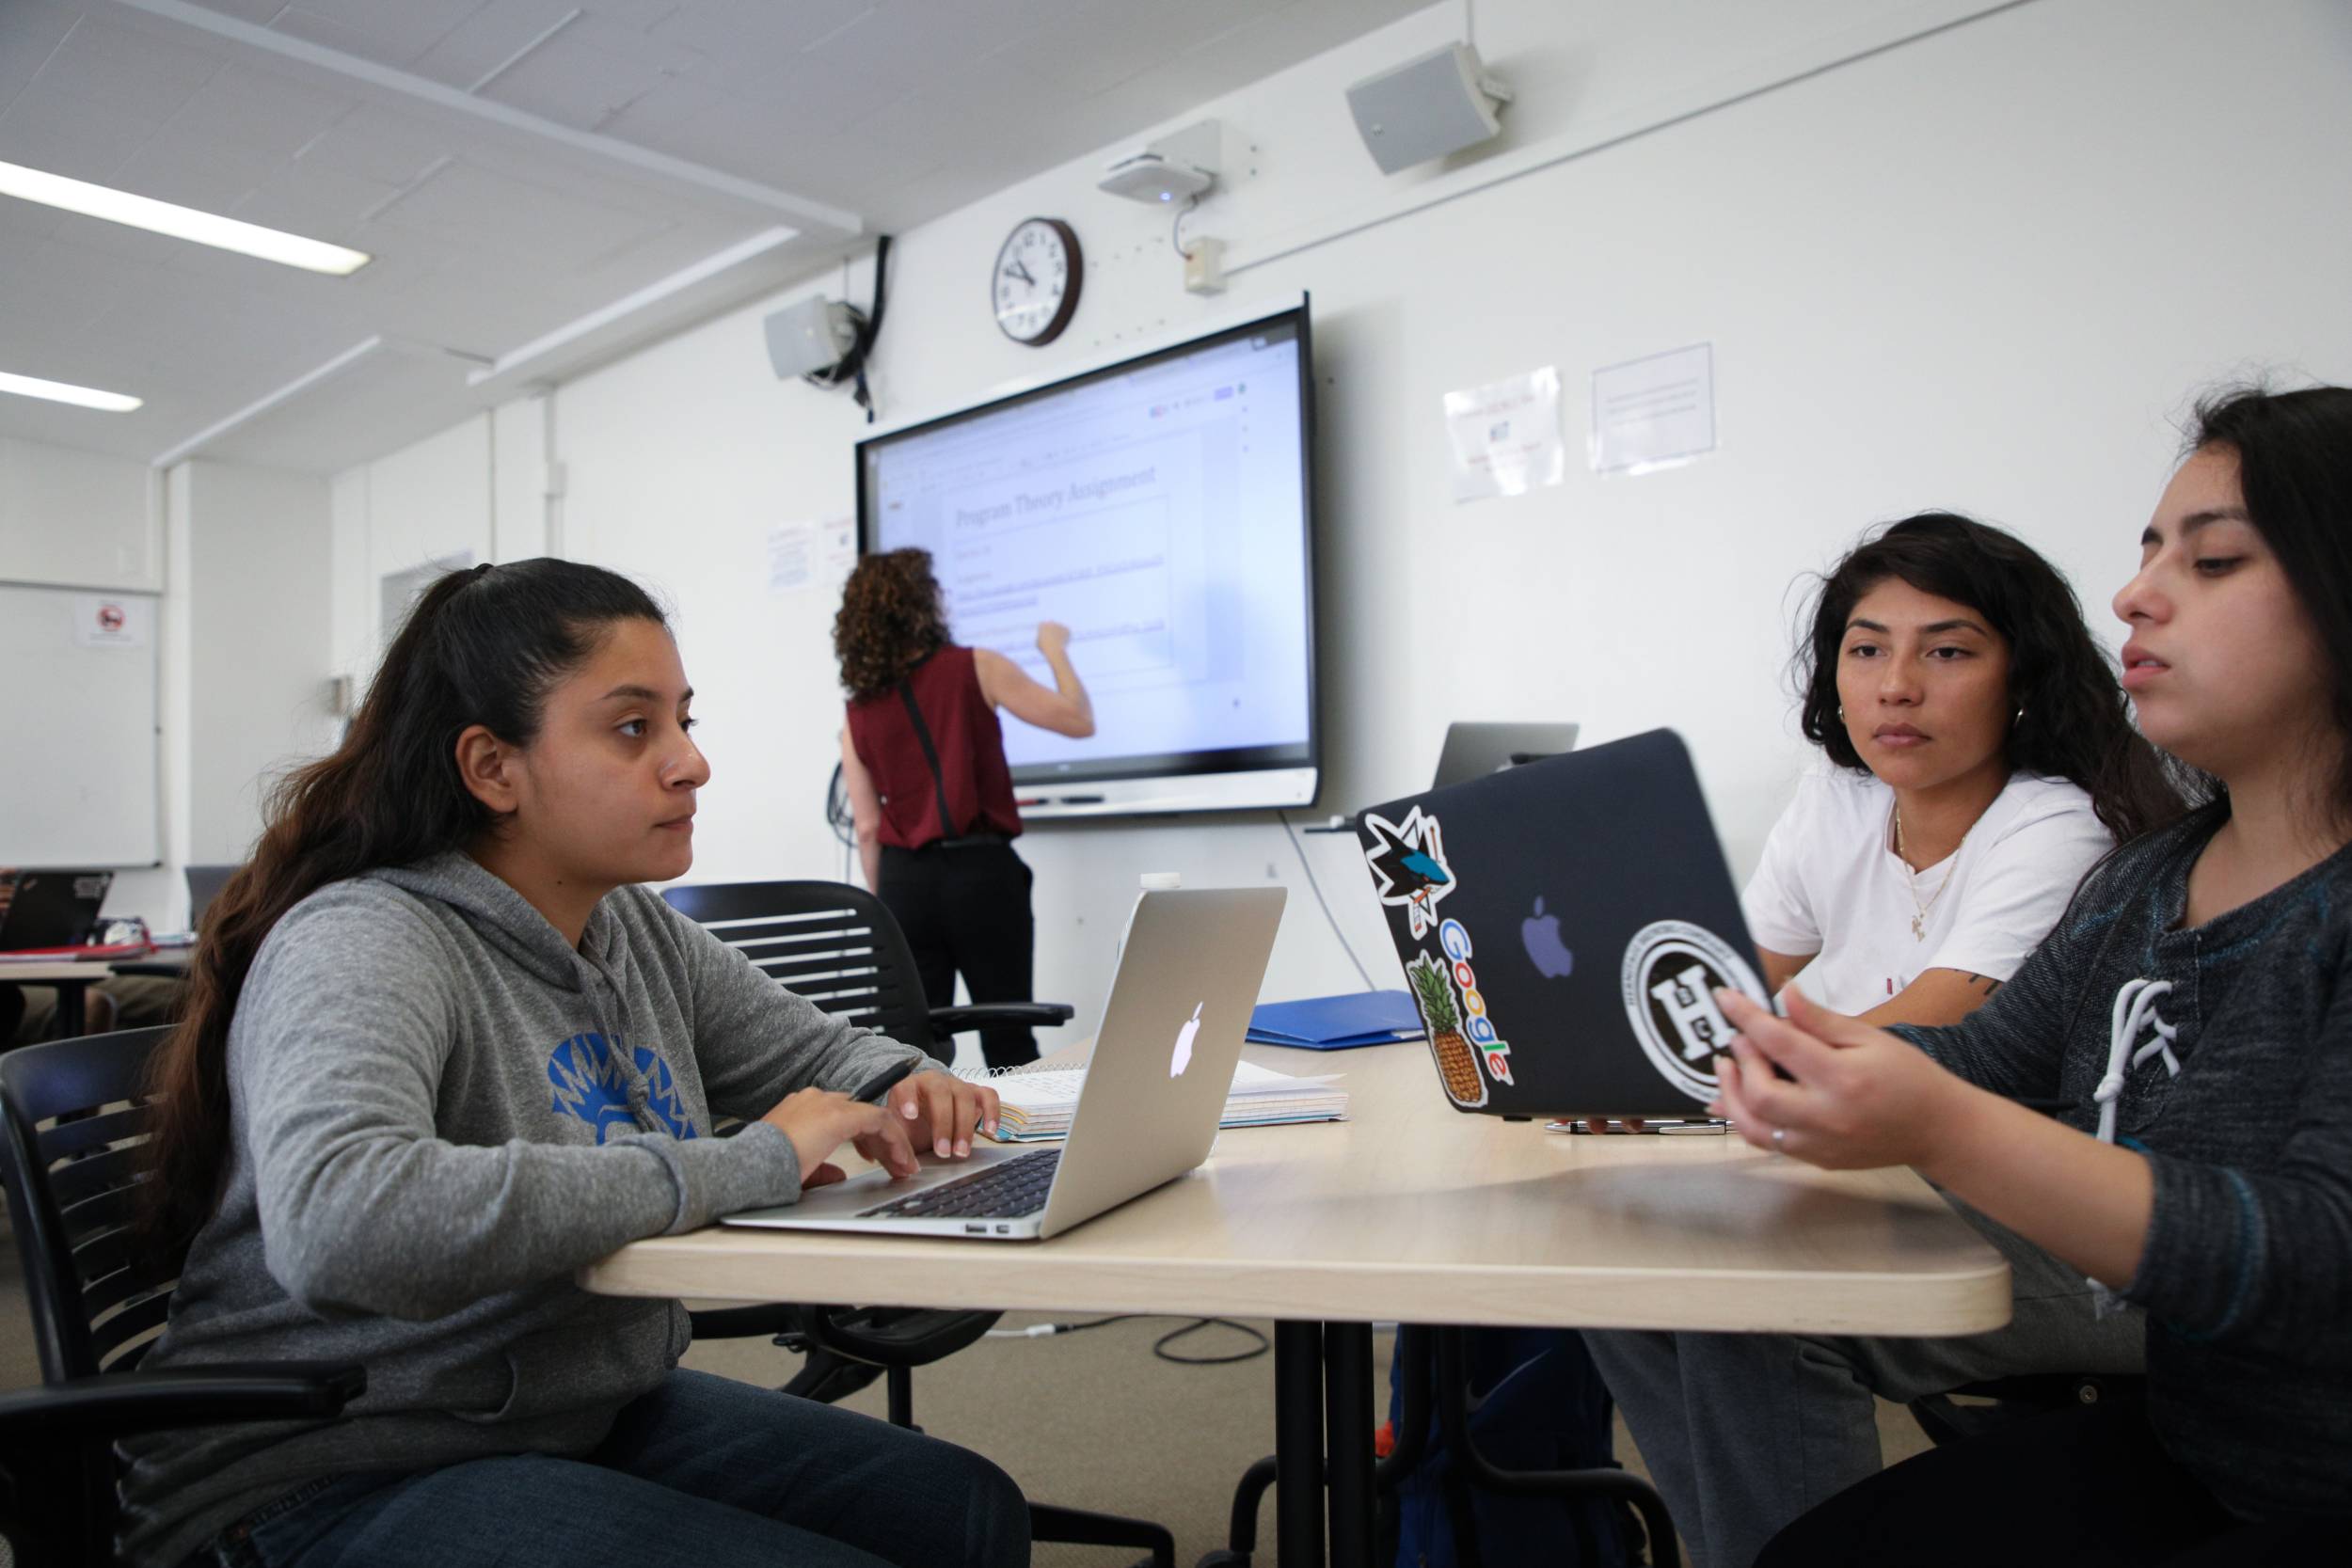 A group of students sit at a table working on laptops and discussing their work while a teacher teaches on a smart board in the background. 